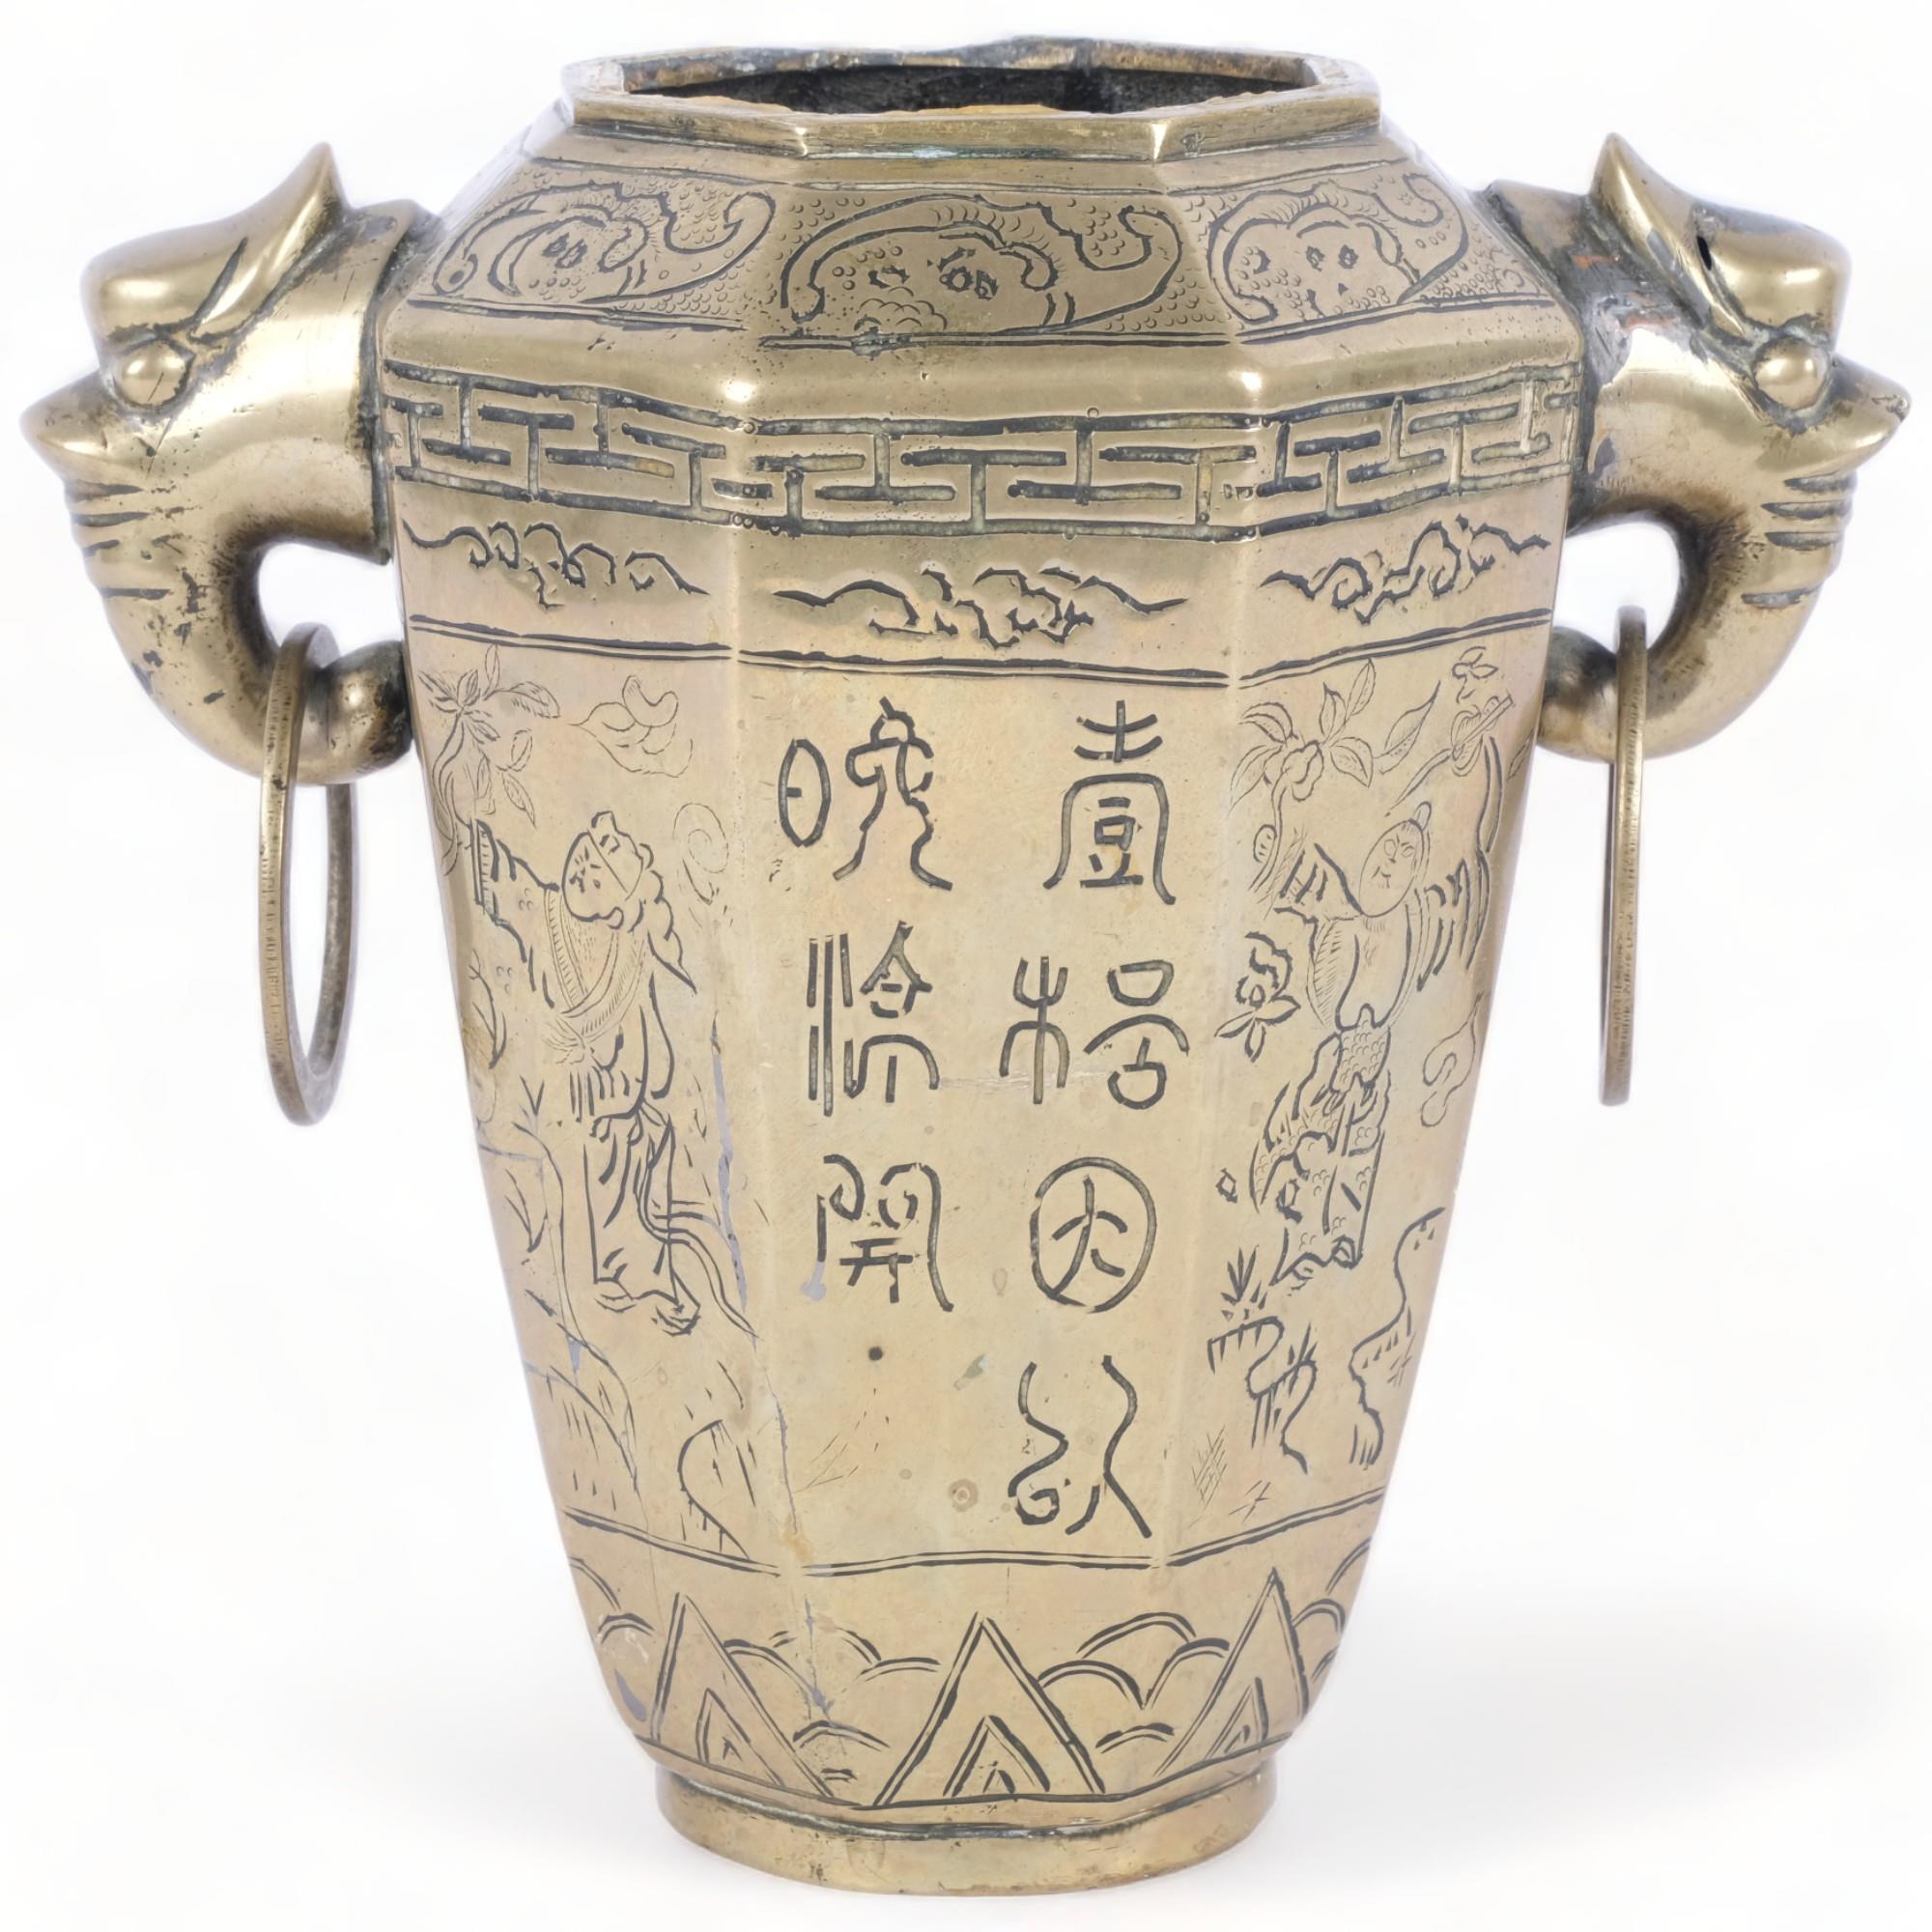 A Chinese brass vase of octagonal form, with ring handles and incised script, H19cm